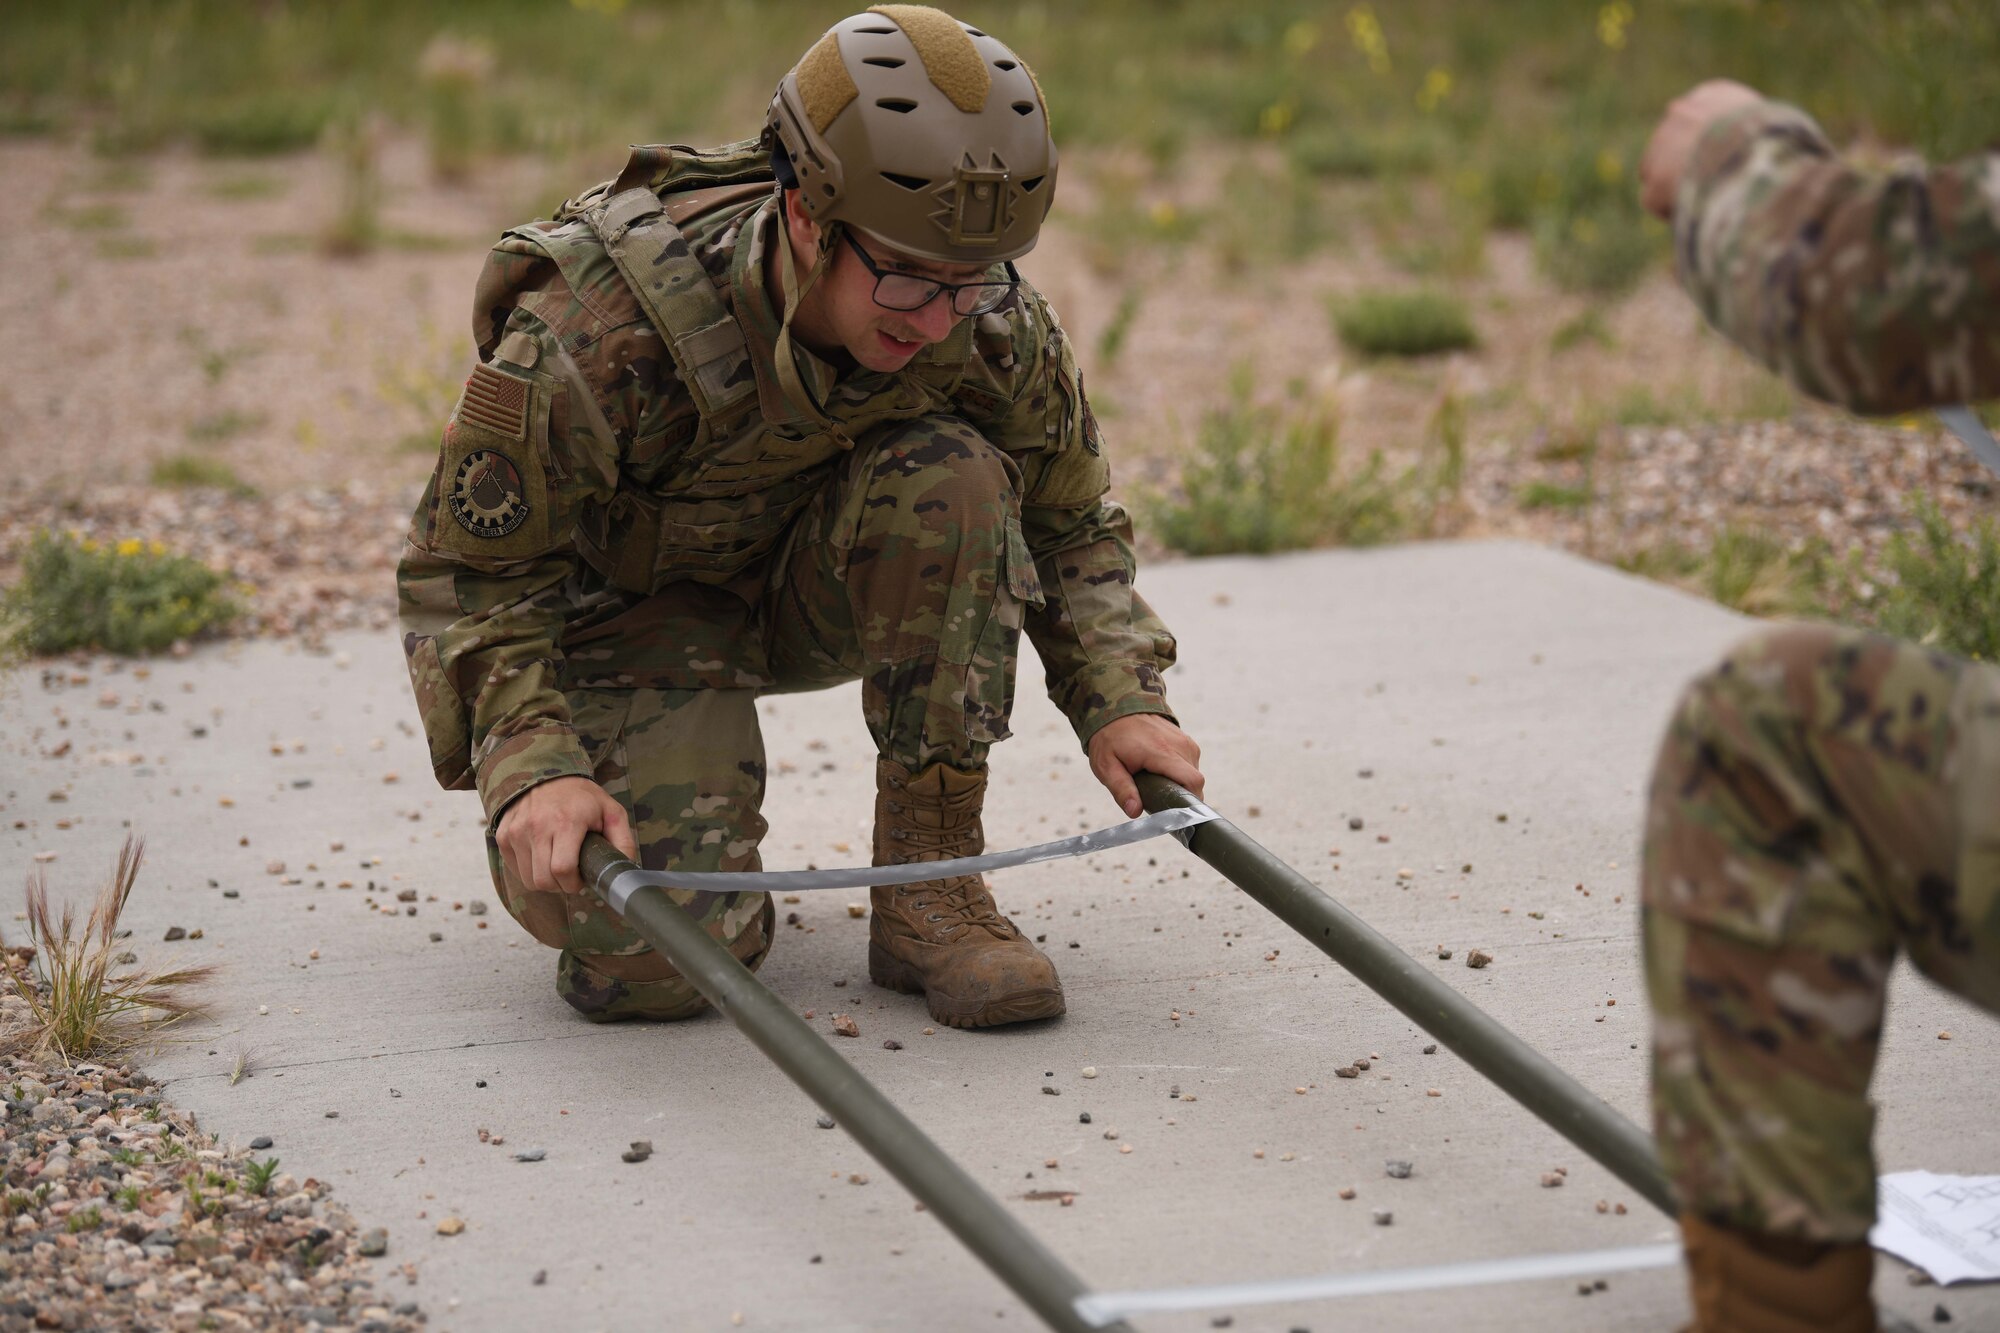 Senior Airman Tommy Gordon, a Pavement and Equipment Operator with the 90th Civil Engineering Squadron, practices proper assembly of equipment that would go toward the retrieval of an injured person during the 90 CES Readiness Challenge on F.E. Warren Air Force Base, Wyoming, July 1, 2021. The purpose of the exercise was to train the readiness capabilities of the Airmen with the 90 CES. (U.S. Air Force photo by Airman 1st Class Darius Frazier)